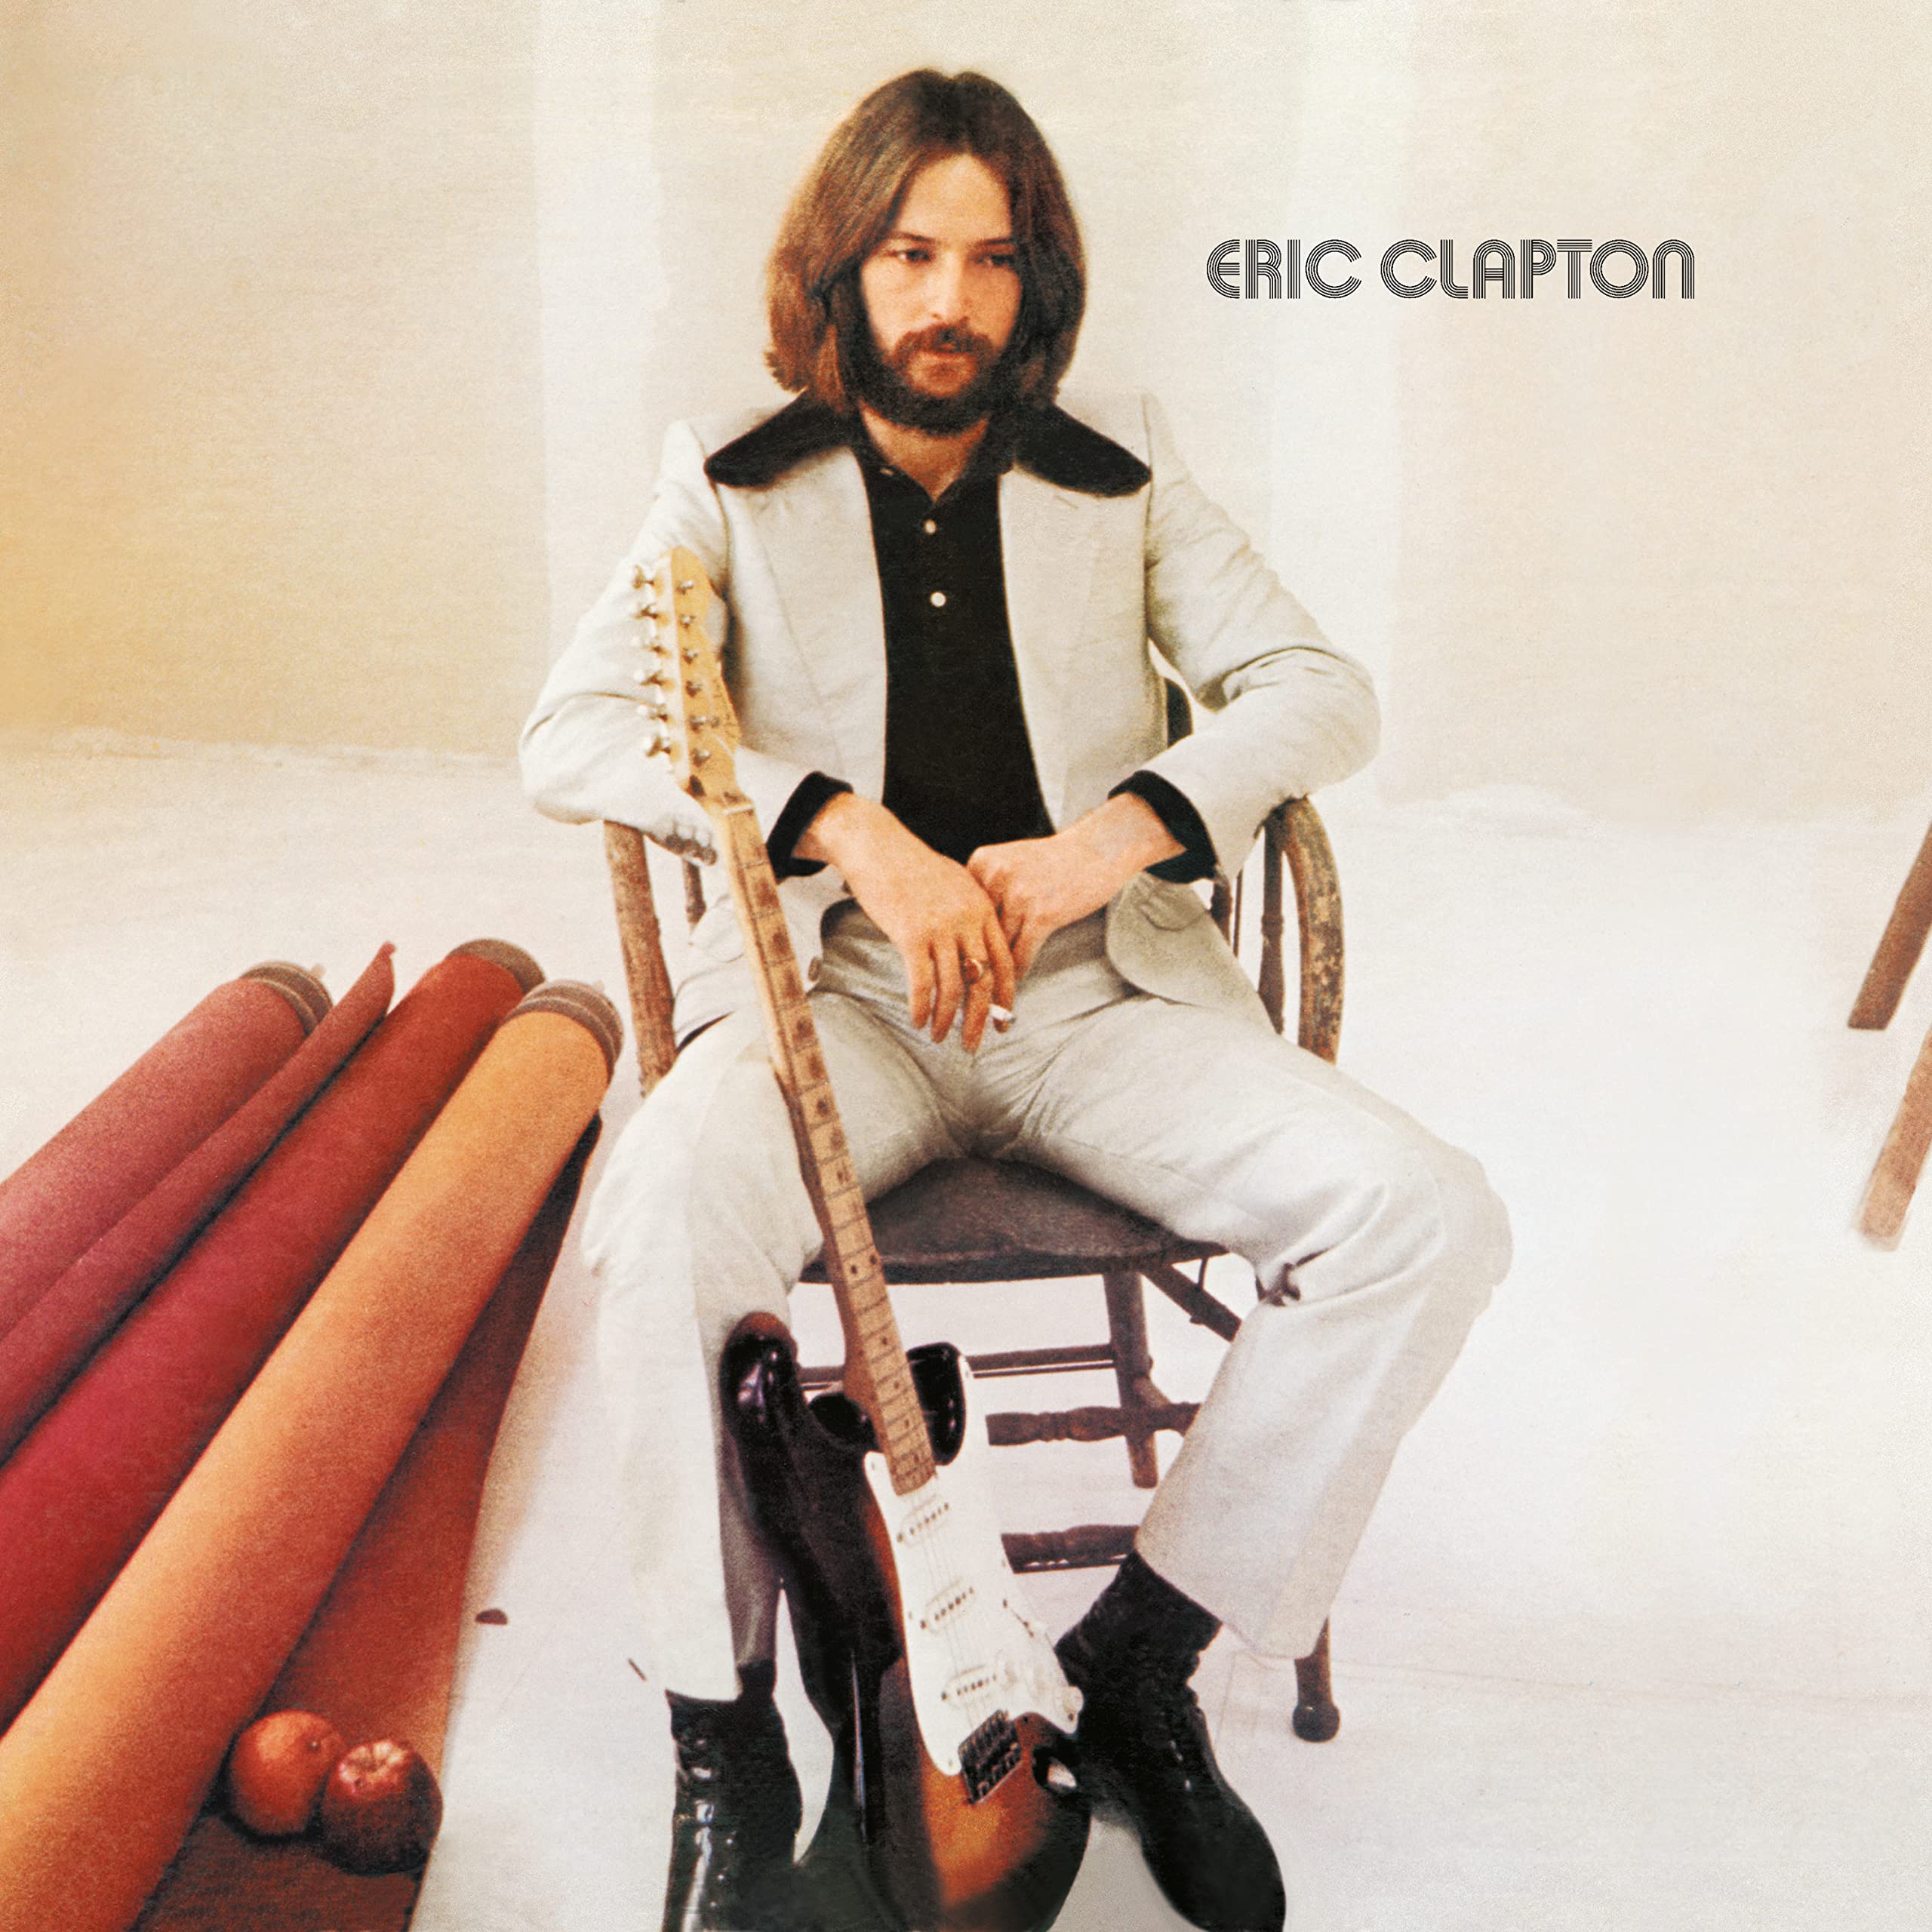 Eric Clapton – Eric Clapton (4CD Deluxe Edition) (2021) FLAC